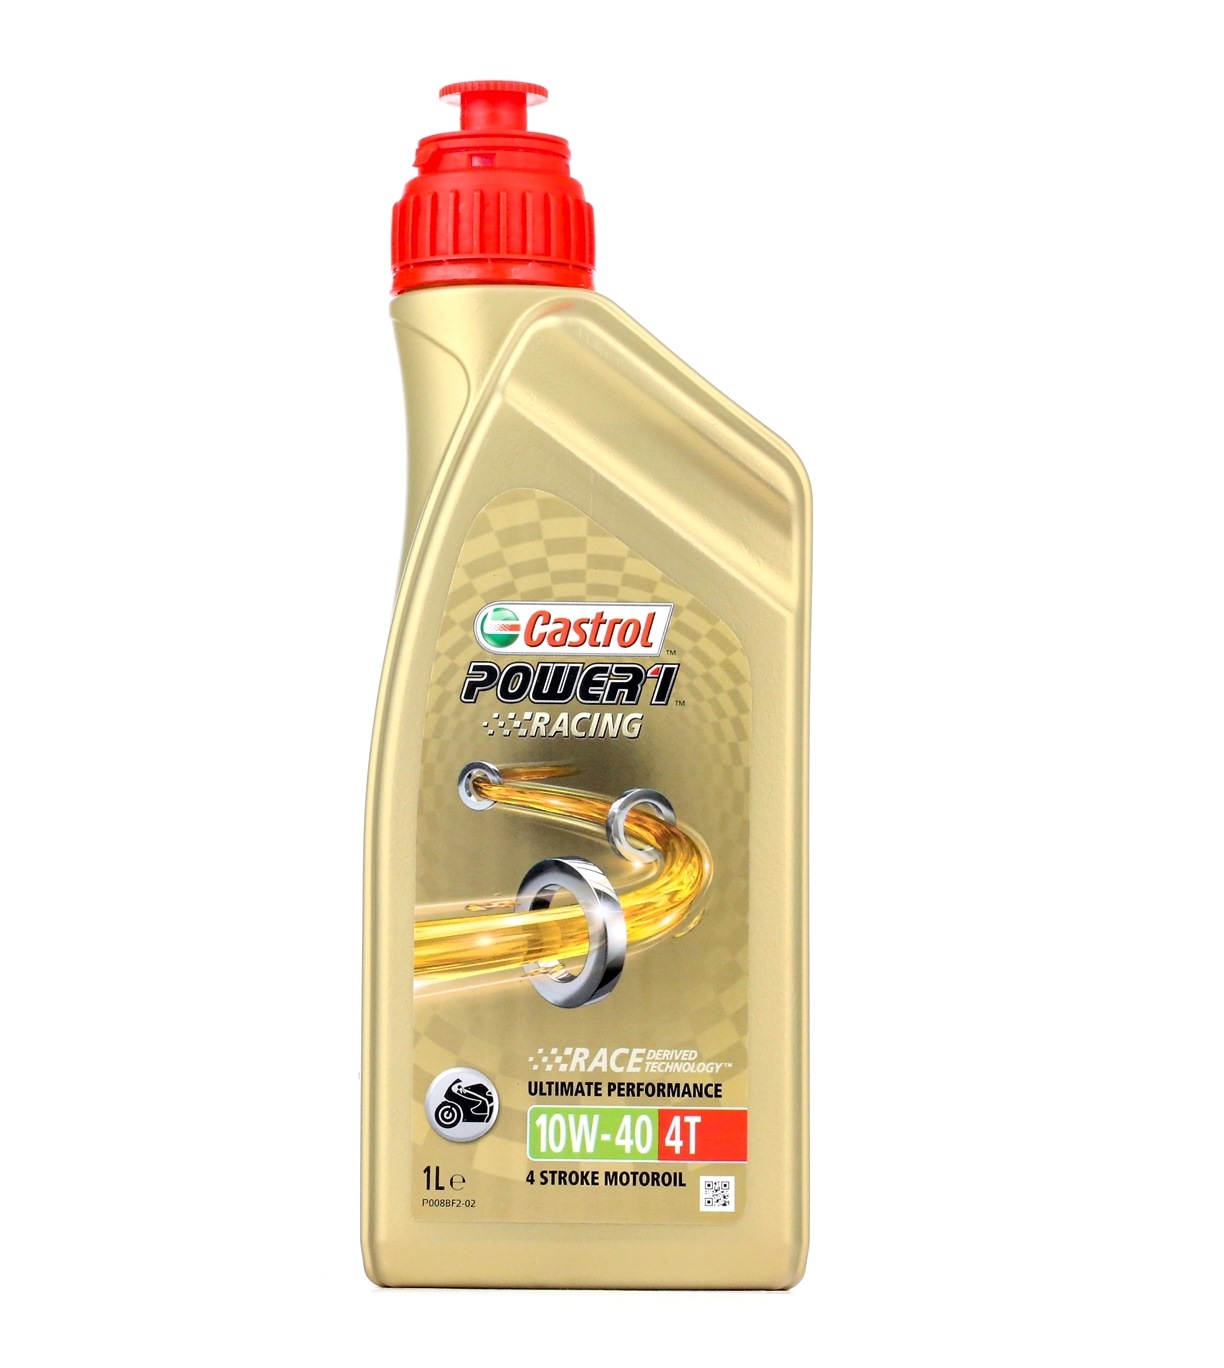 14E94A Engine oil from CASTROL